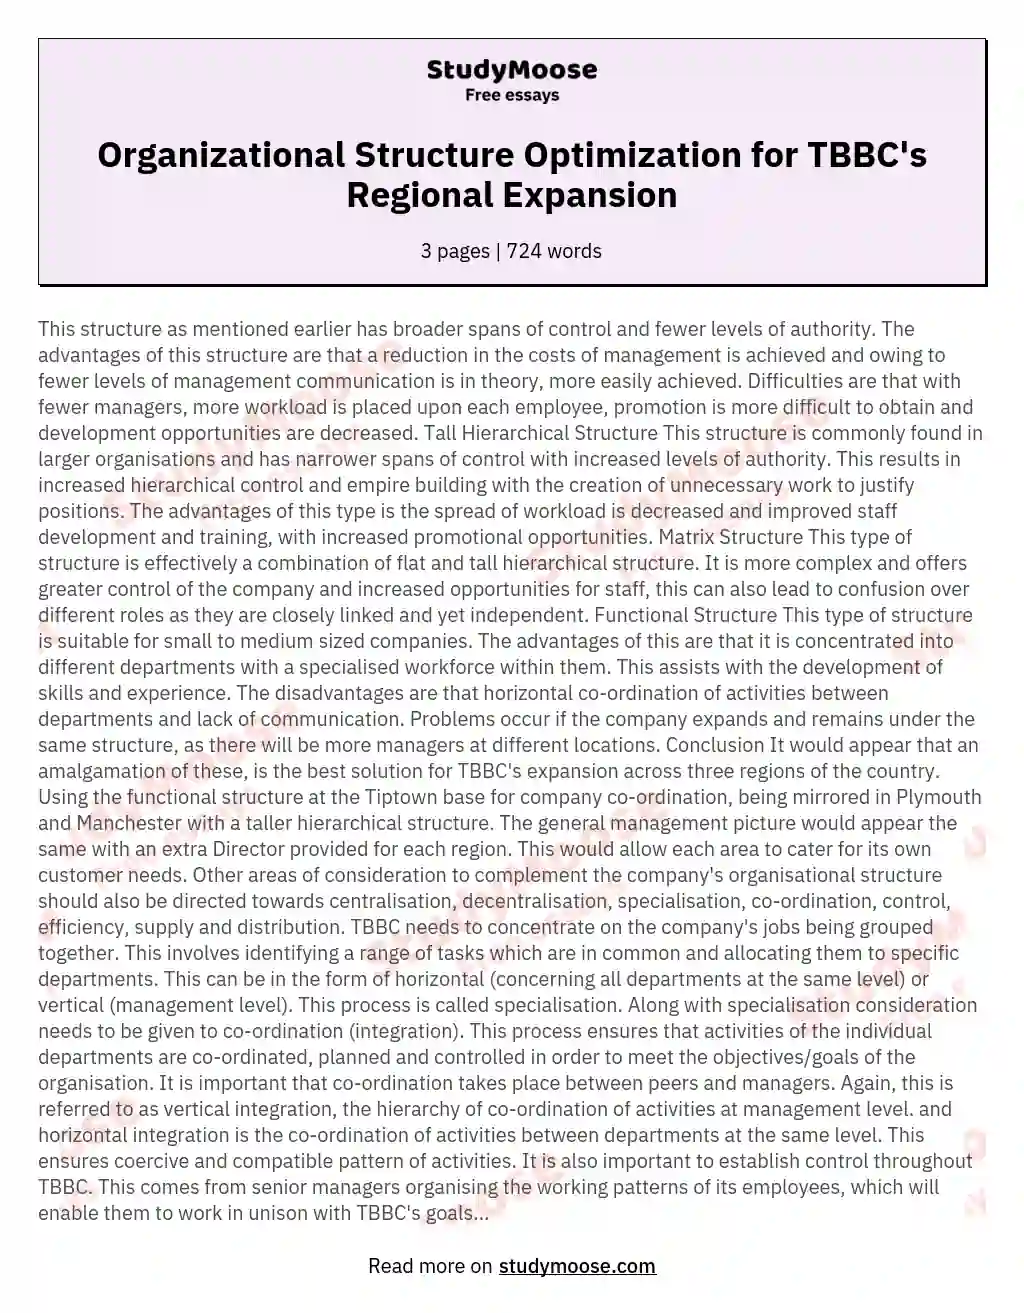 Organizational Structure Optimization for TBBC's Regional Expansion essay